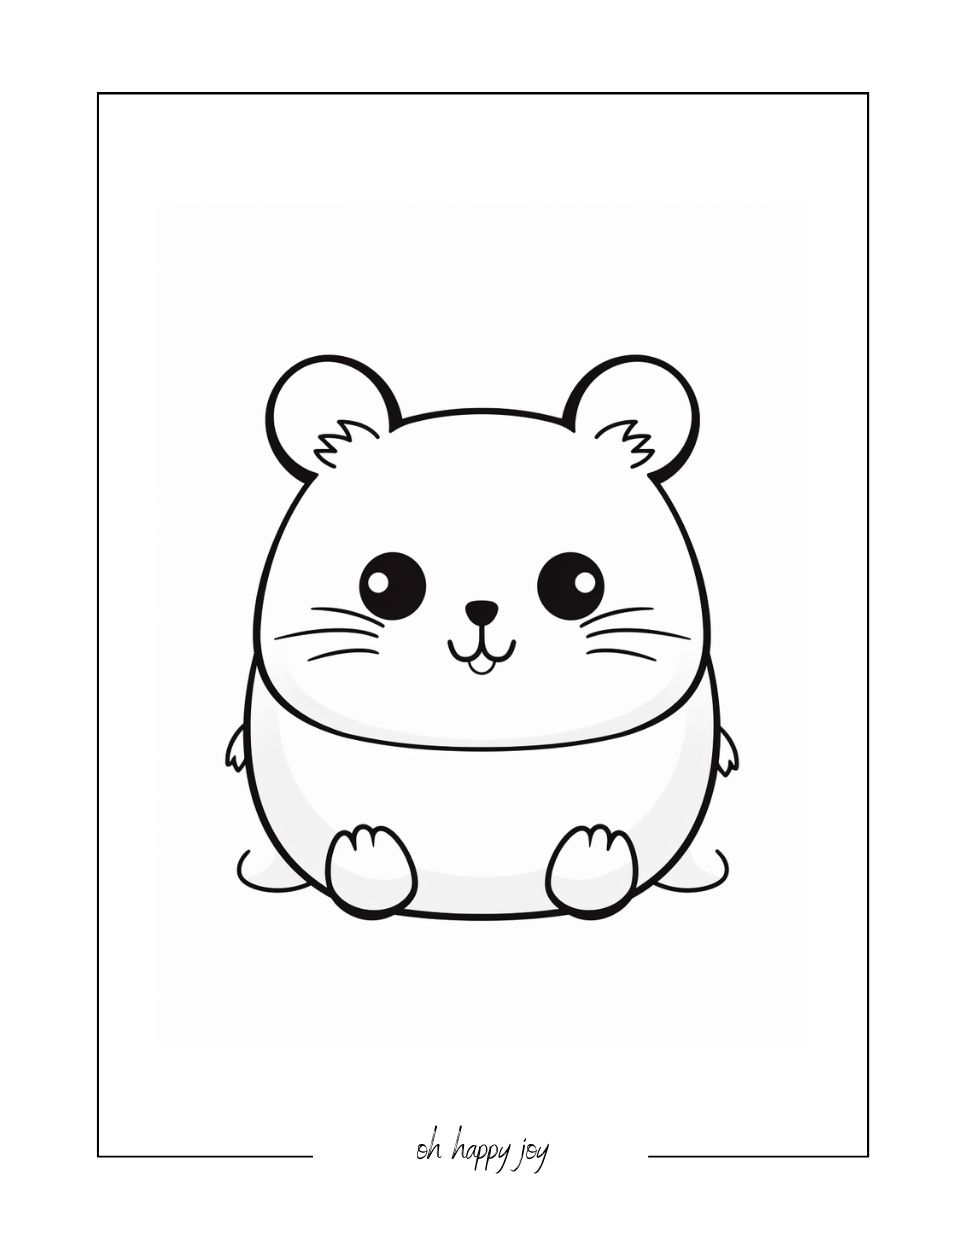 Small squishmallow free coloring sheet